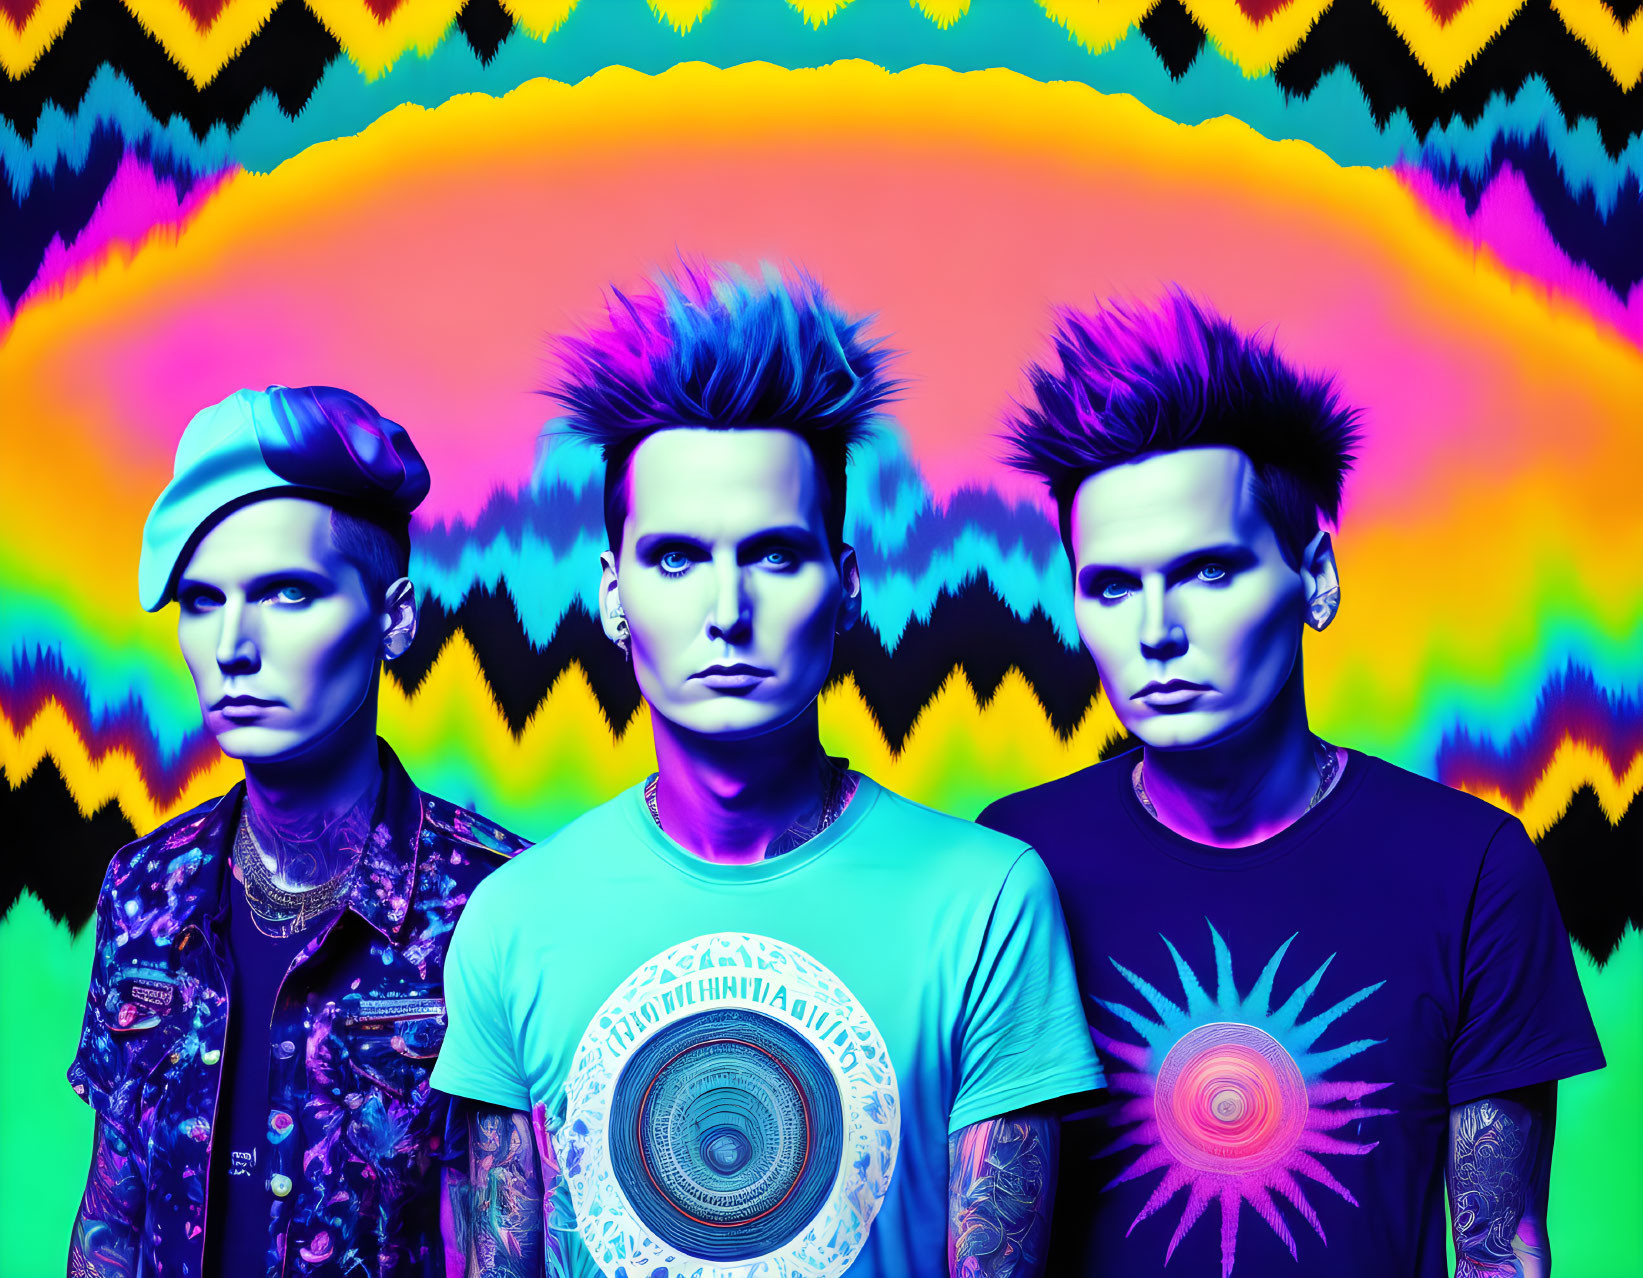 Stylized characters with punk hairstyles on vibrant, psychedelic background